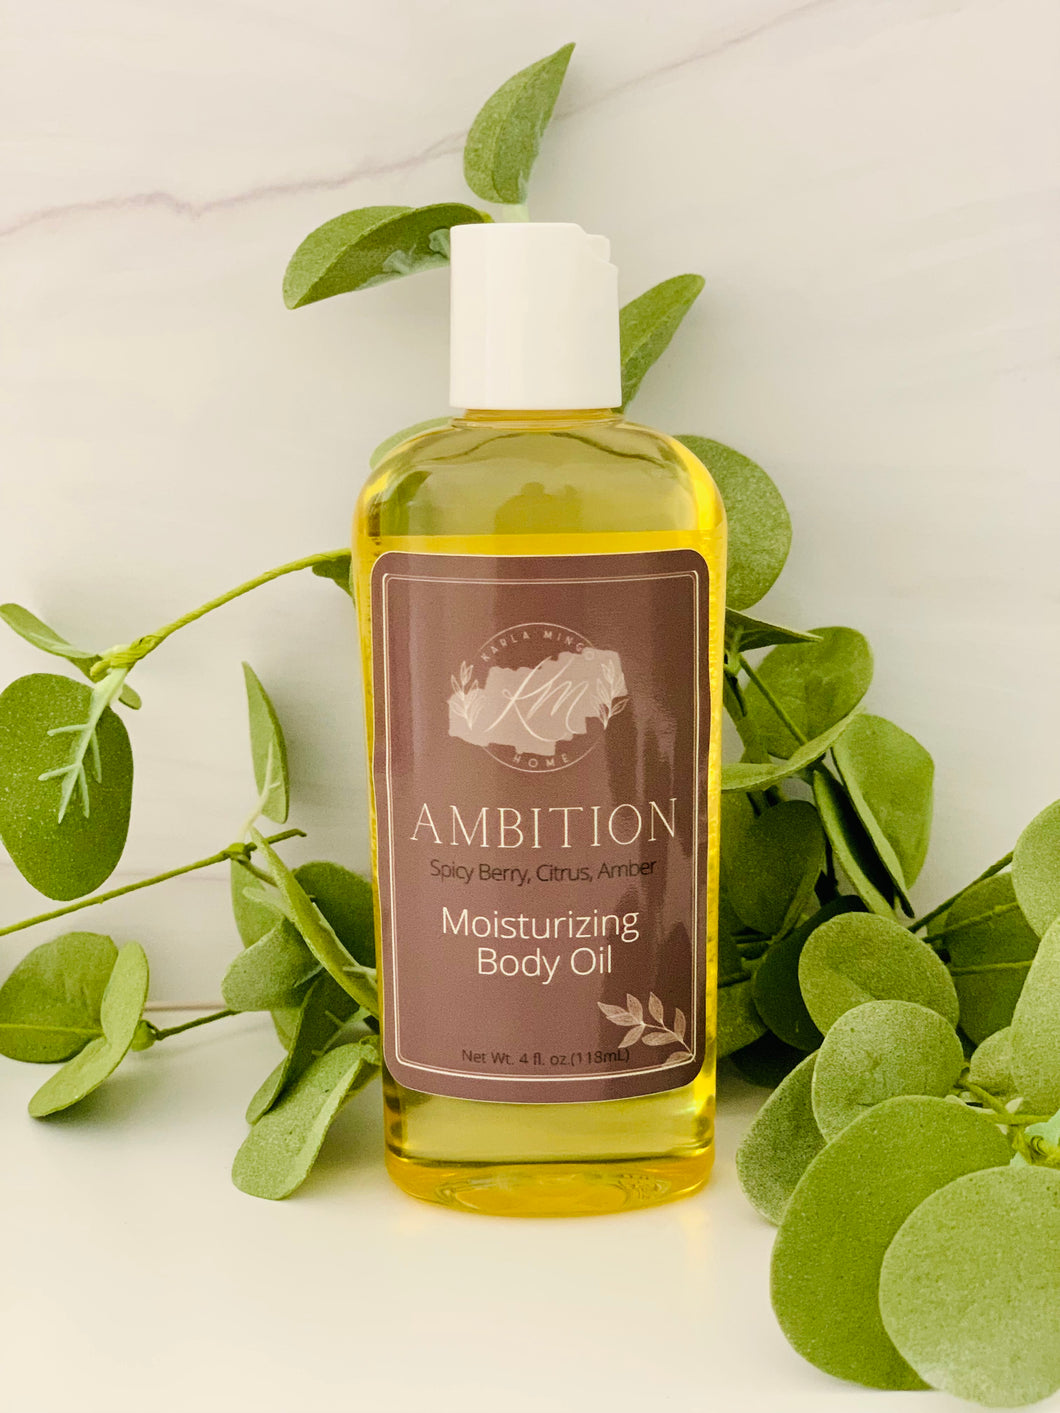 AMBITION Moisturizing Body Oil*Spicy Berry,Citrus,Amber